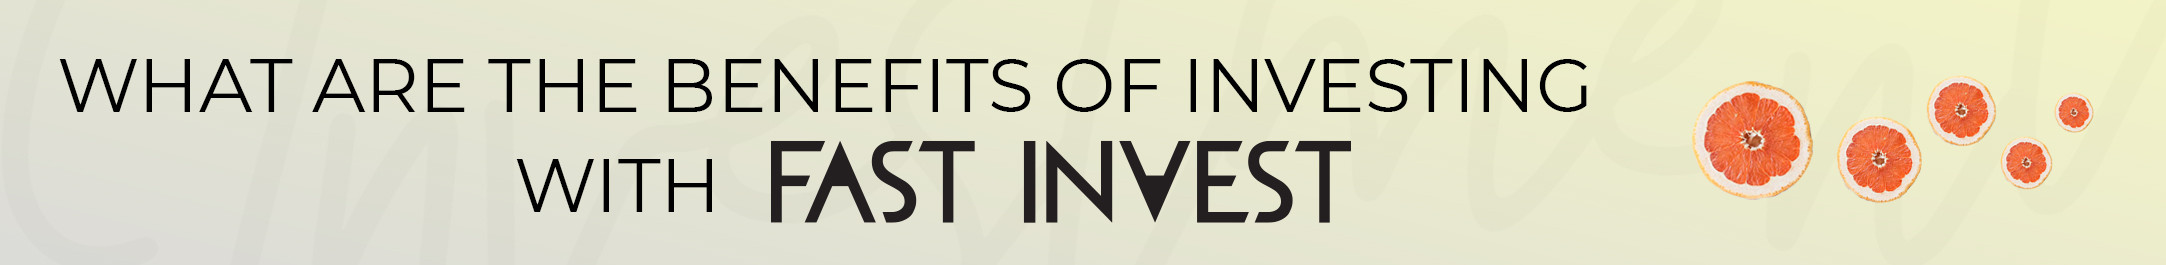 What are the Benefits of Investing with FAST INVEST?